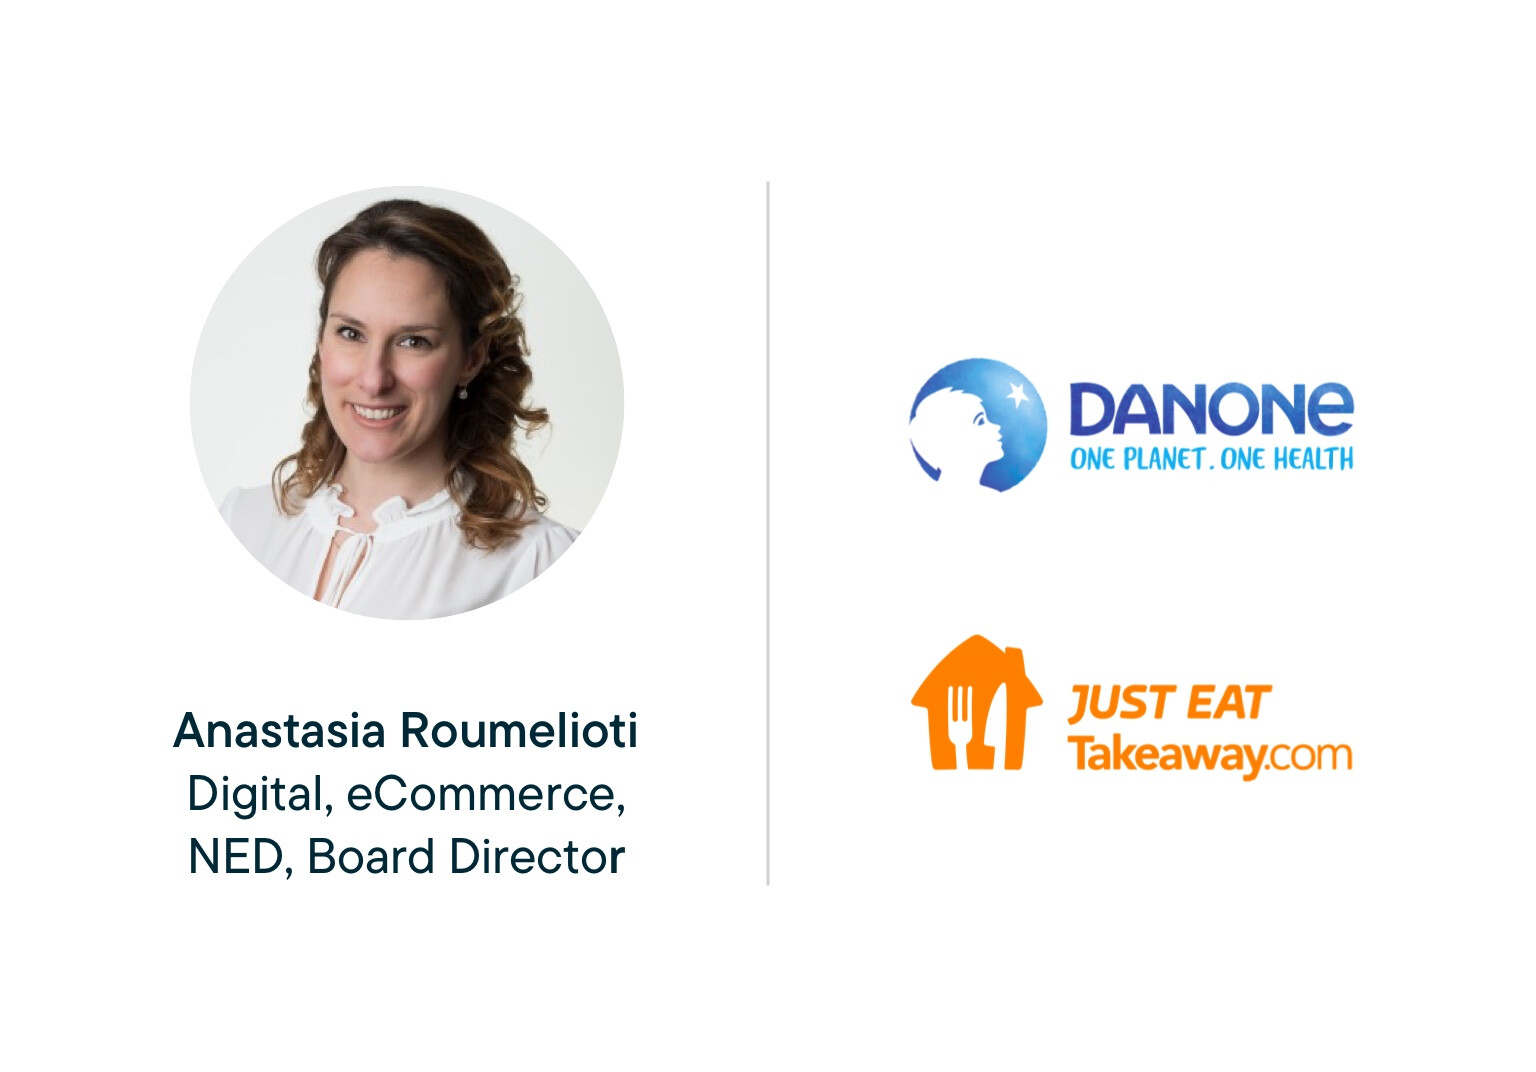 Just Eat & Danone: Digital & business transformation for growth